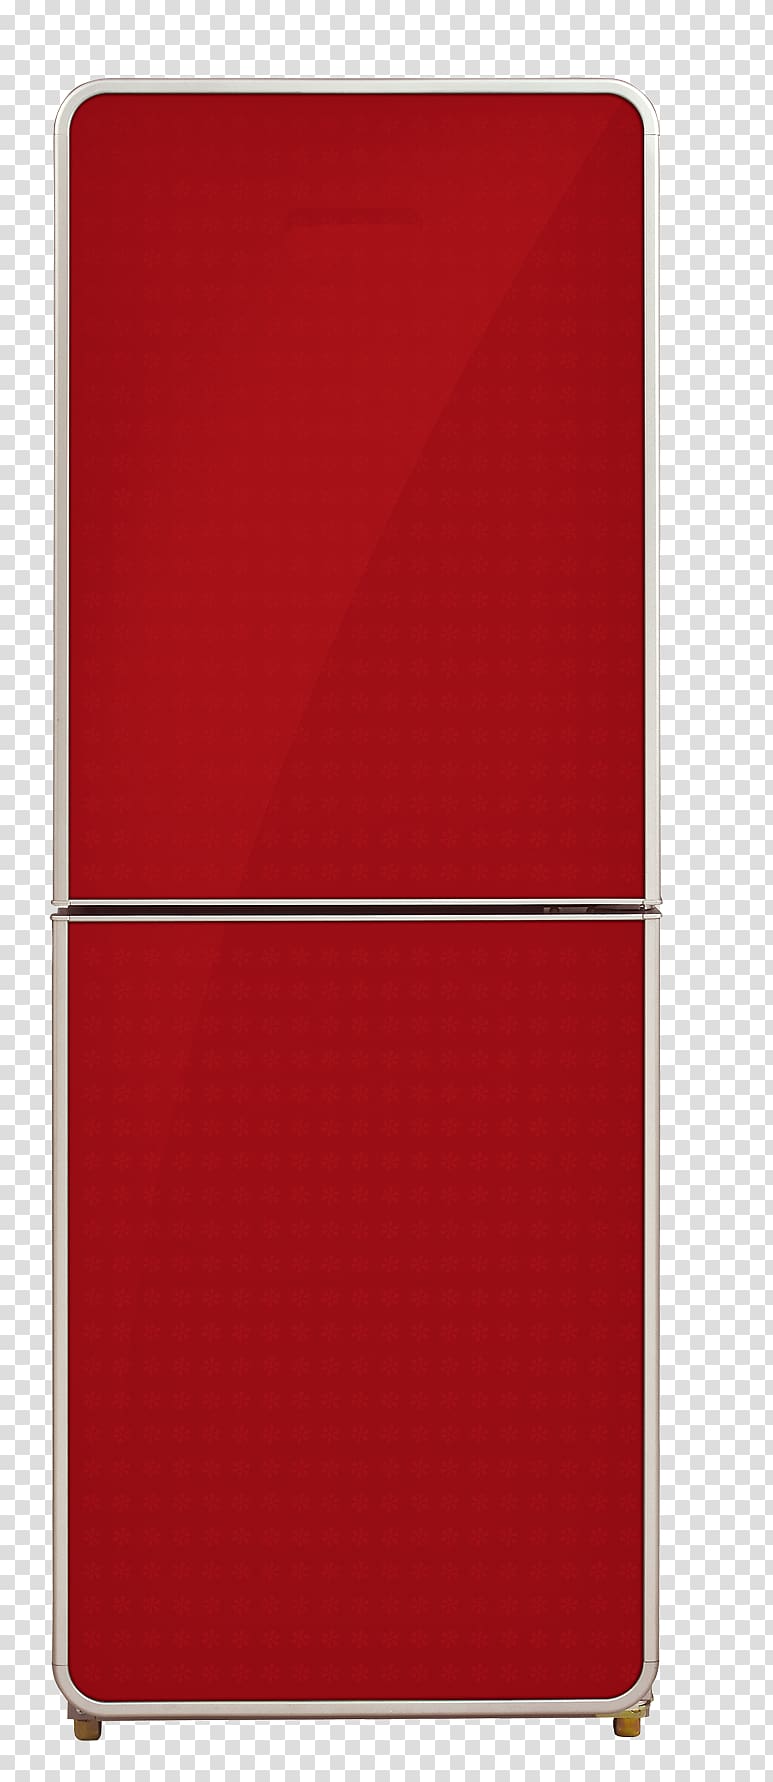 Refrigerator Icon, Red refrigerator transparent background PNG clipart